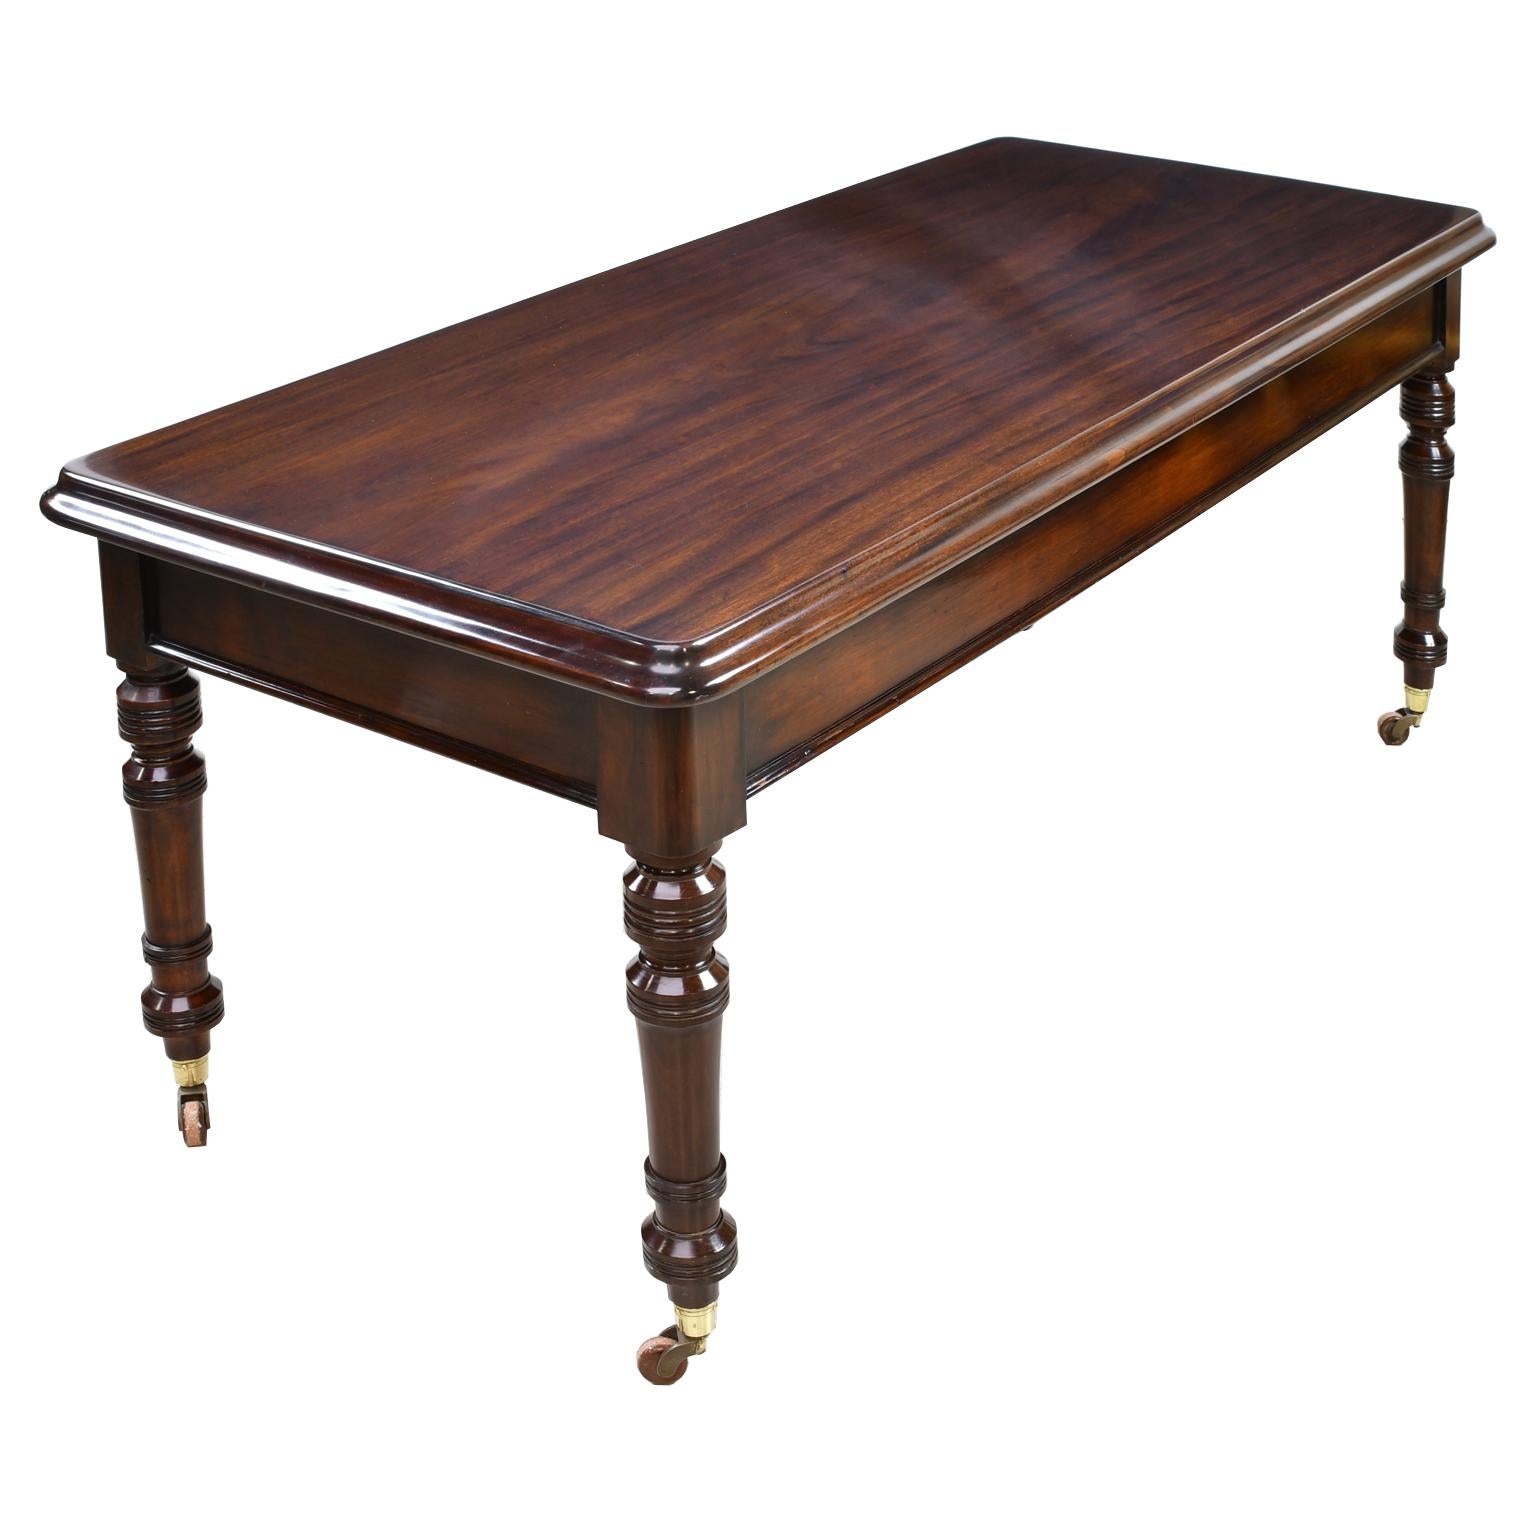 Early Victorian Early English Victorian Library Table in Mahogany, circa 1840